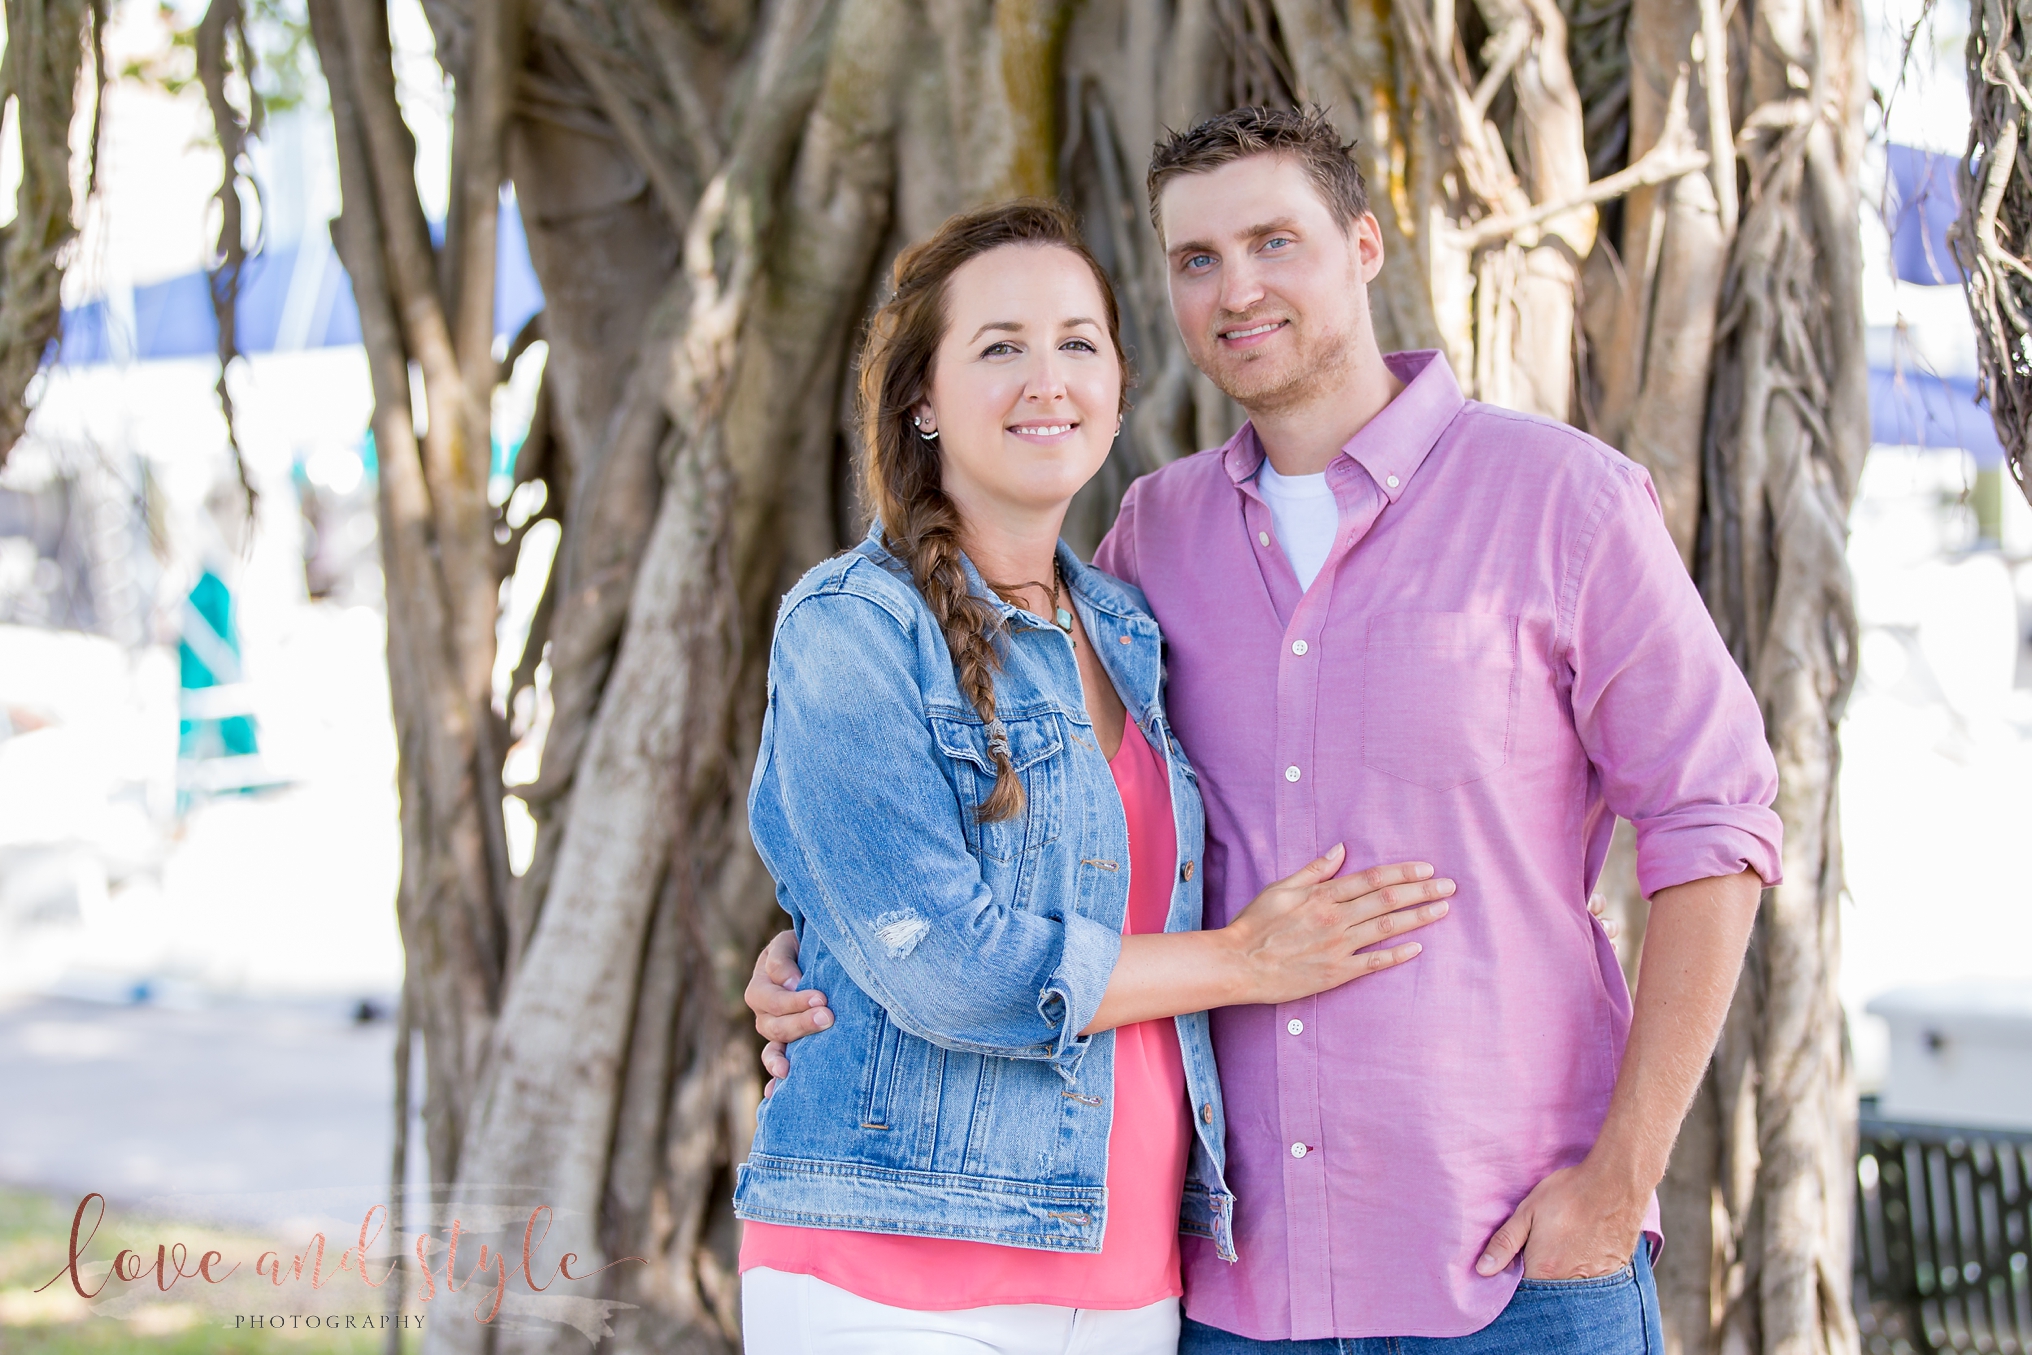 Sarasota Engagement Photography at Bayfront Park in the morning with the couple under a tree